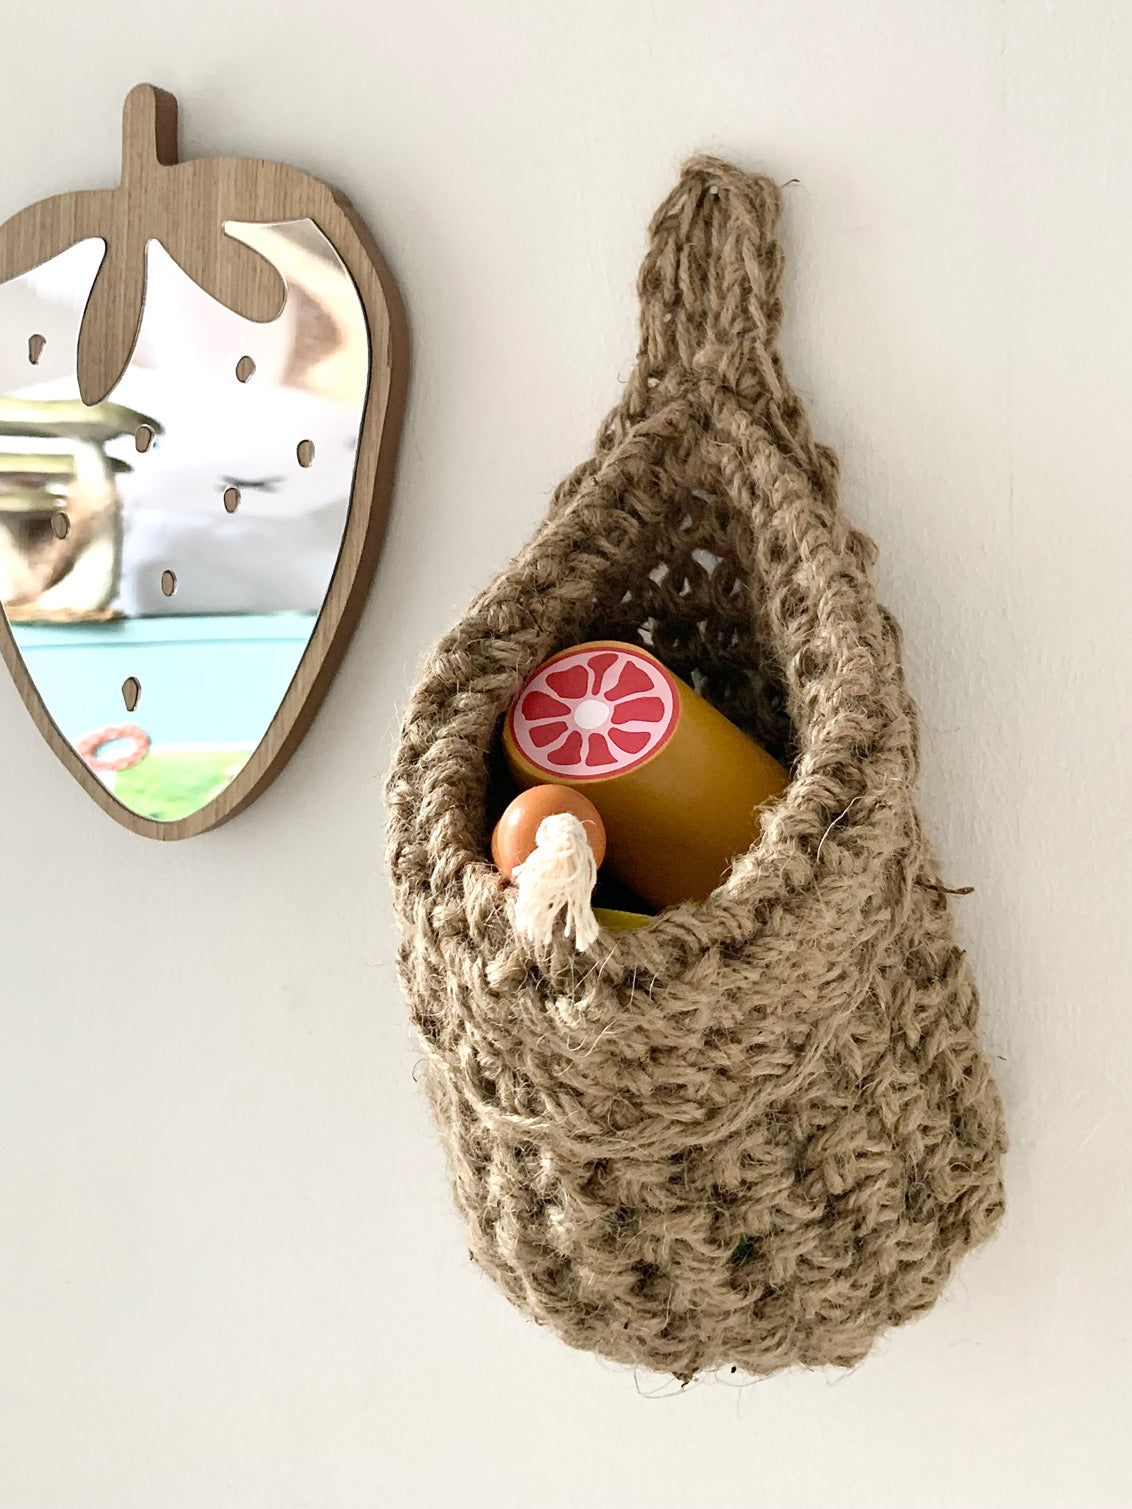 small jute space saving storage bag hanging in a childrens bedroom to orgaanise toys, picture showing a small mirror and storage bag hanging beside eachother, handmade hanging storage bag holding childrens toys